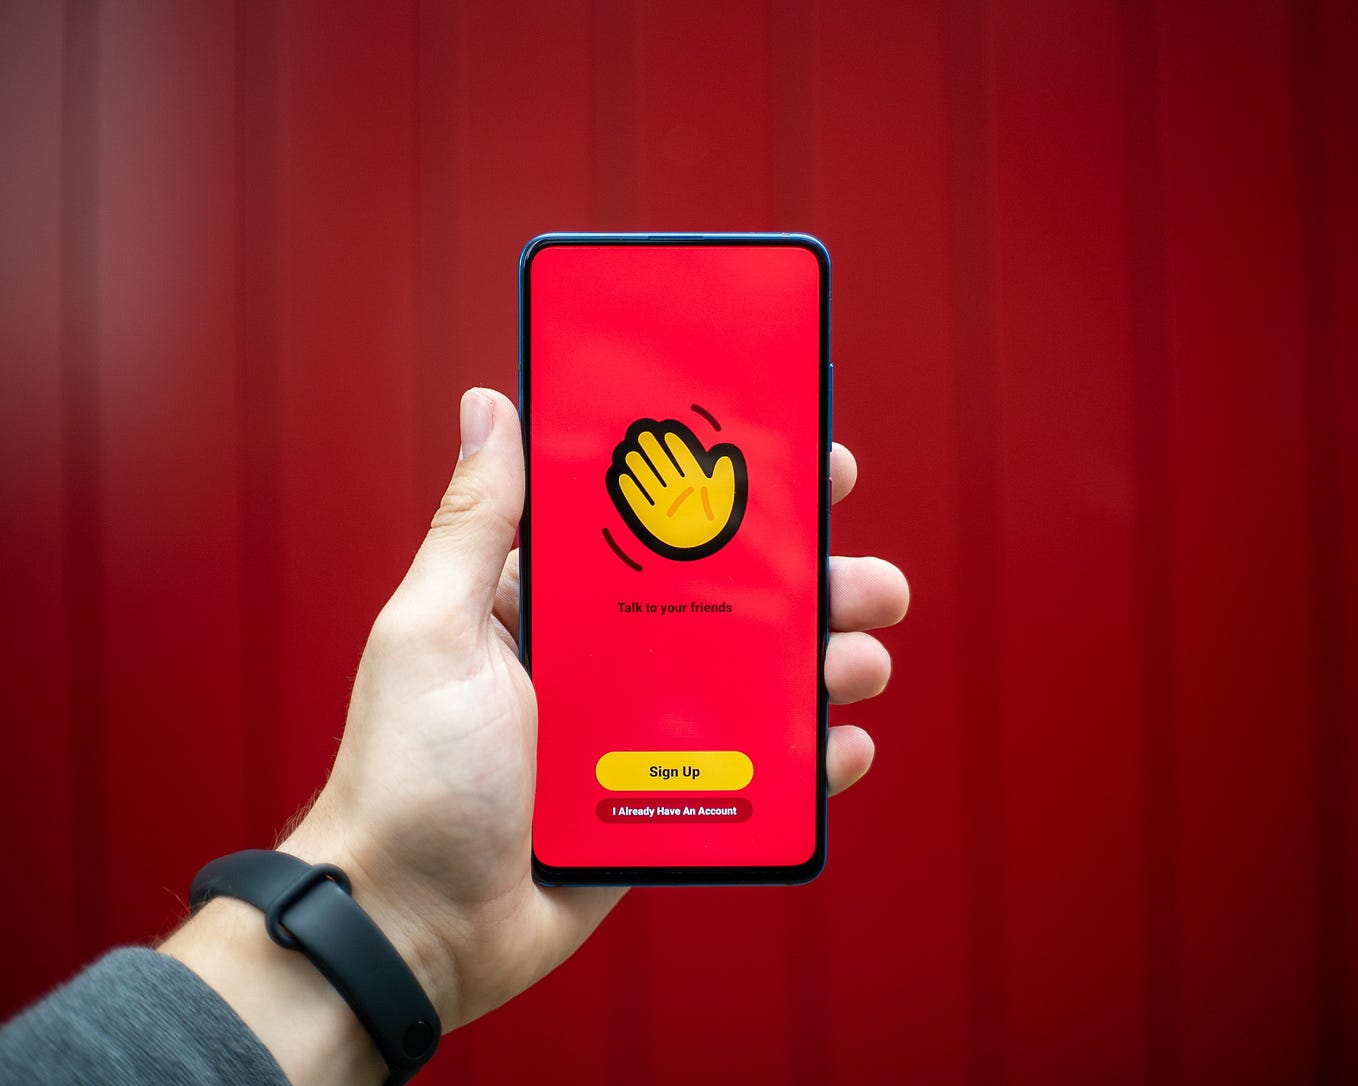 a hand holding a phone with a red background